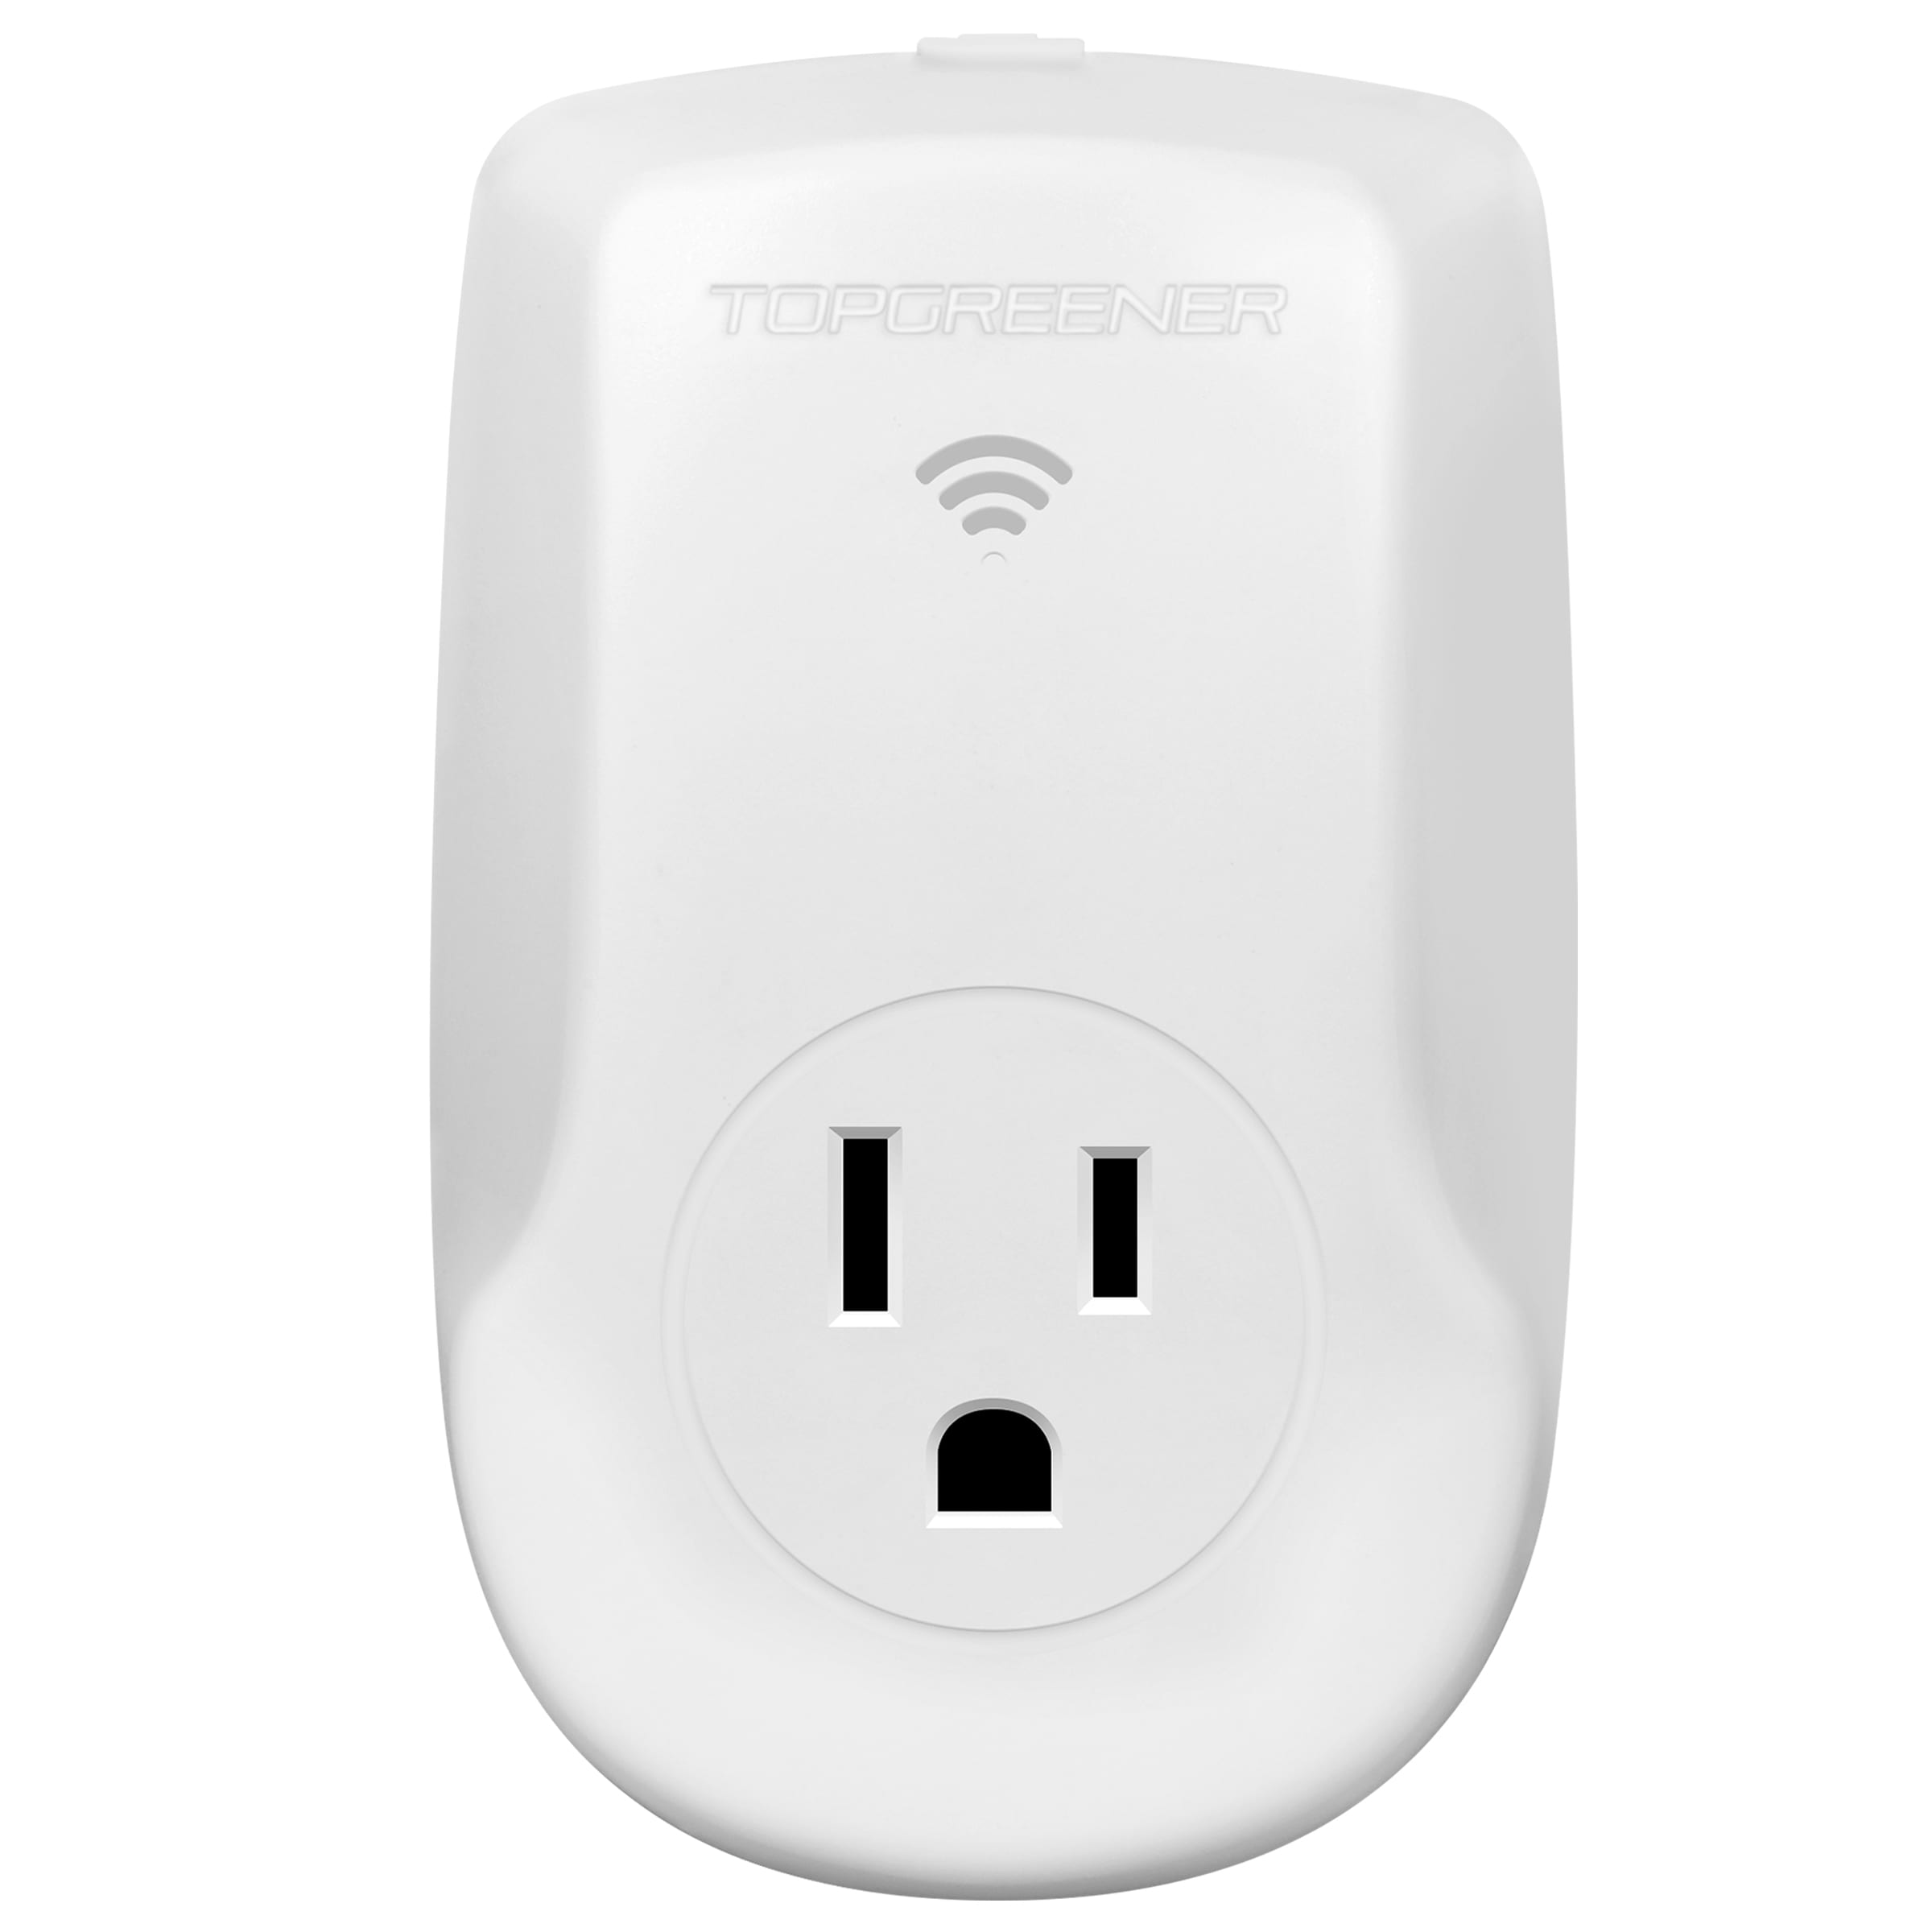 Home Automation Controlpower consumption Mobile App Avail Wifi Smart Plug Remotely control plugged in Electronics App Controlled Home Wi-fi Switch Compatible with Alexa 1 On/Off Scheduling 